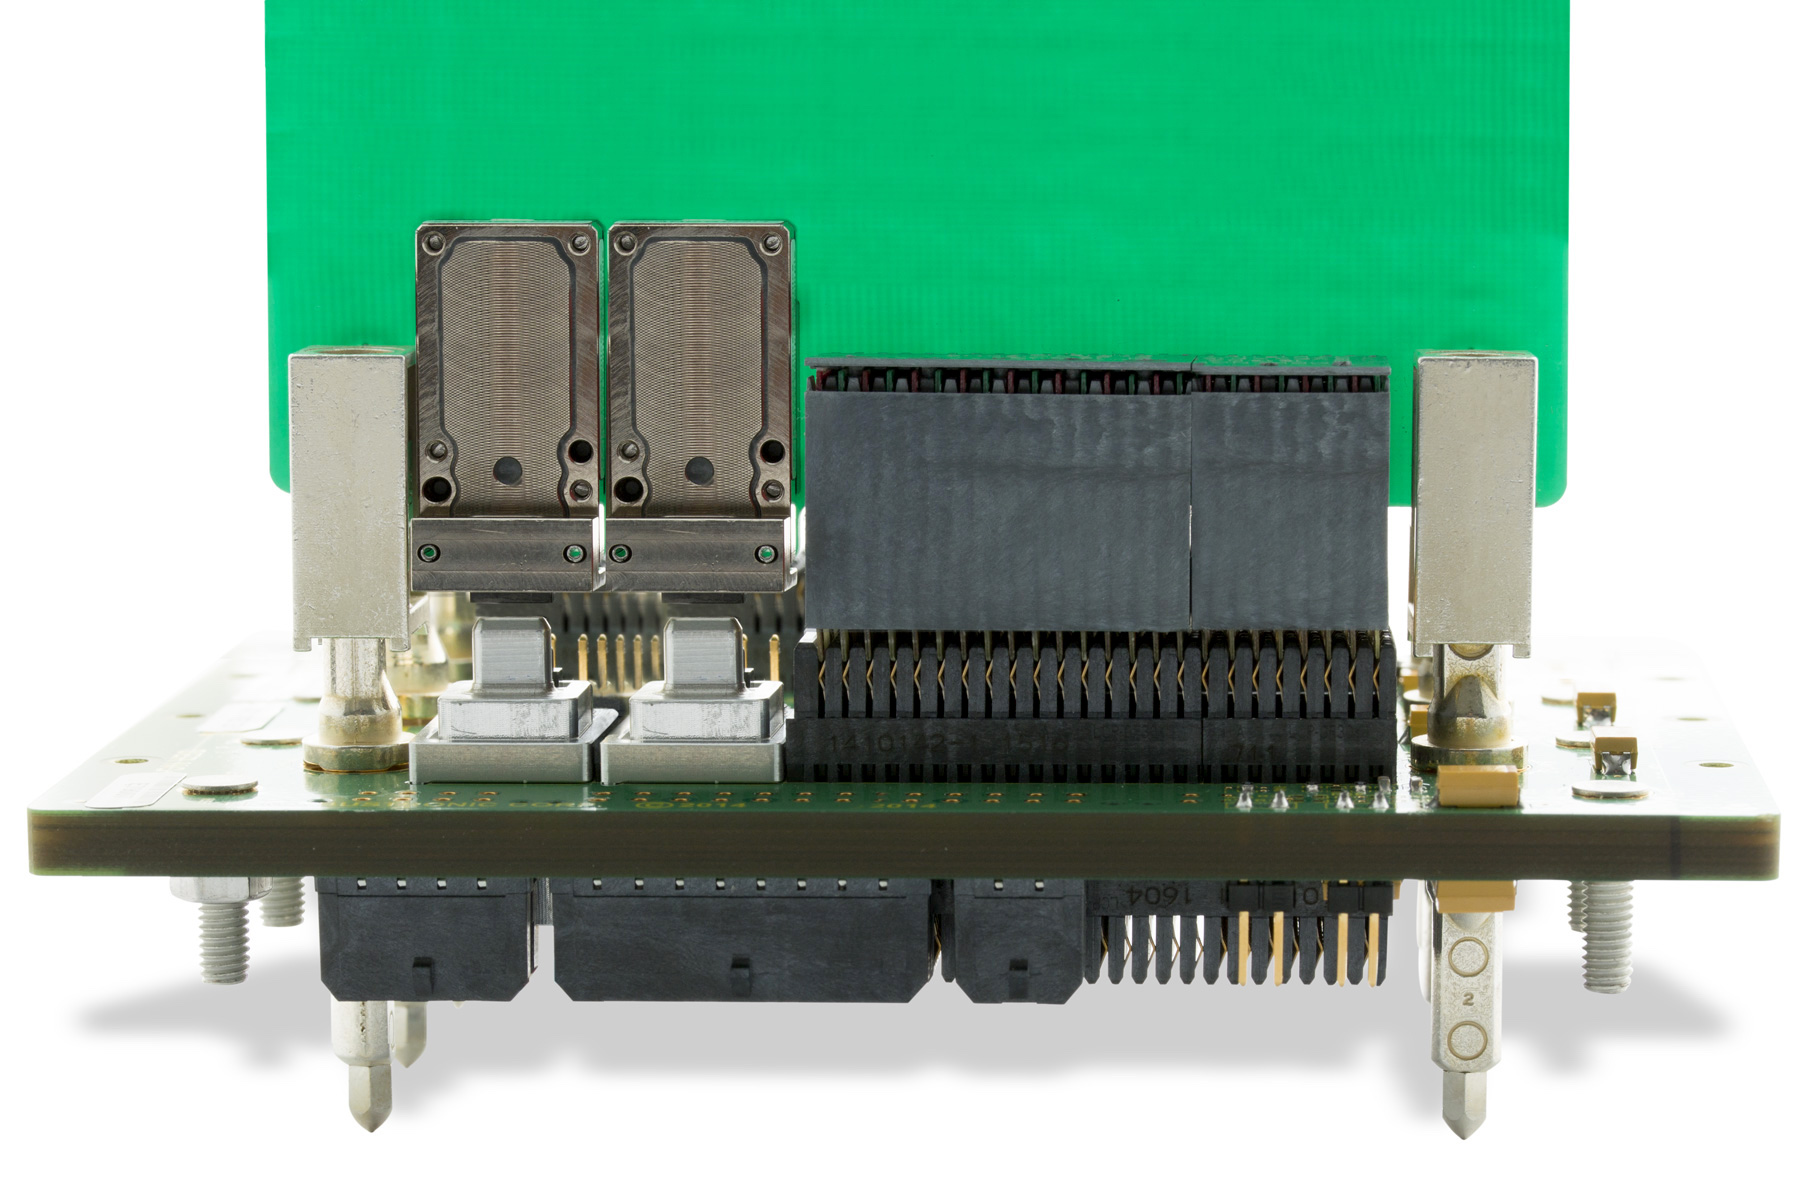 Reflex Photonics LightCONEX® rugged active optical blind-mate interconnects for VPX systems